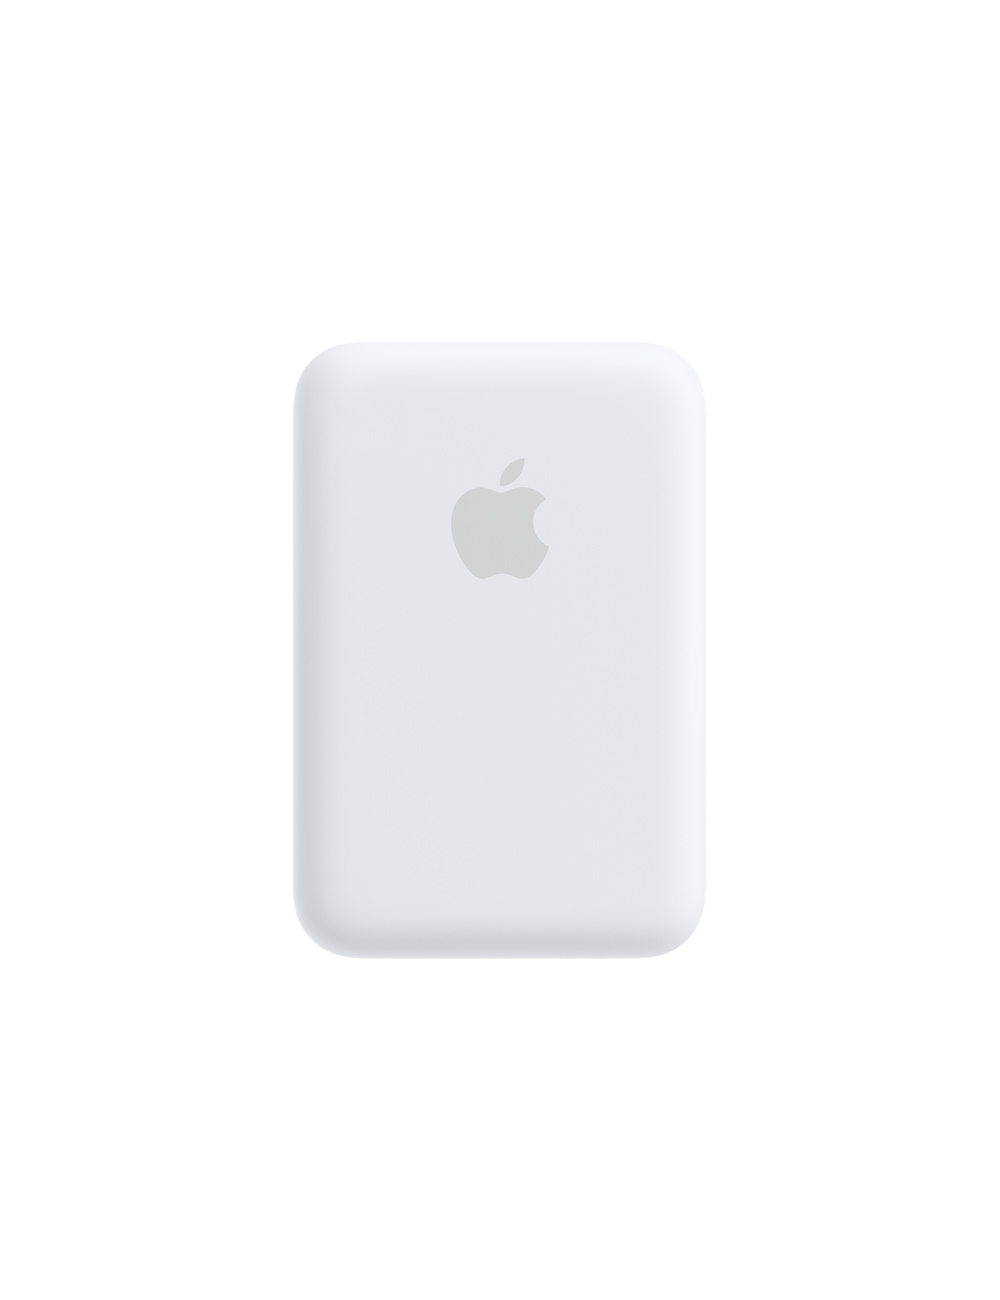 APPLE MAGSAFE BATTERY PACK